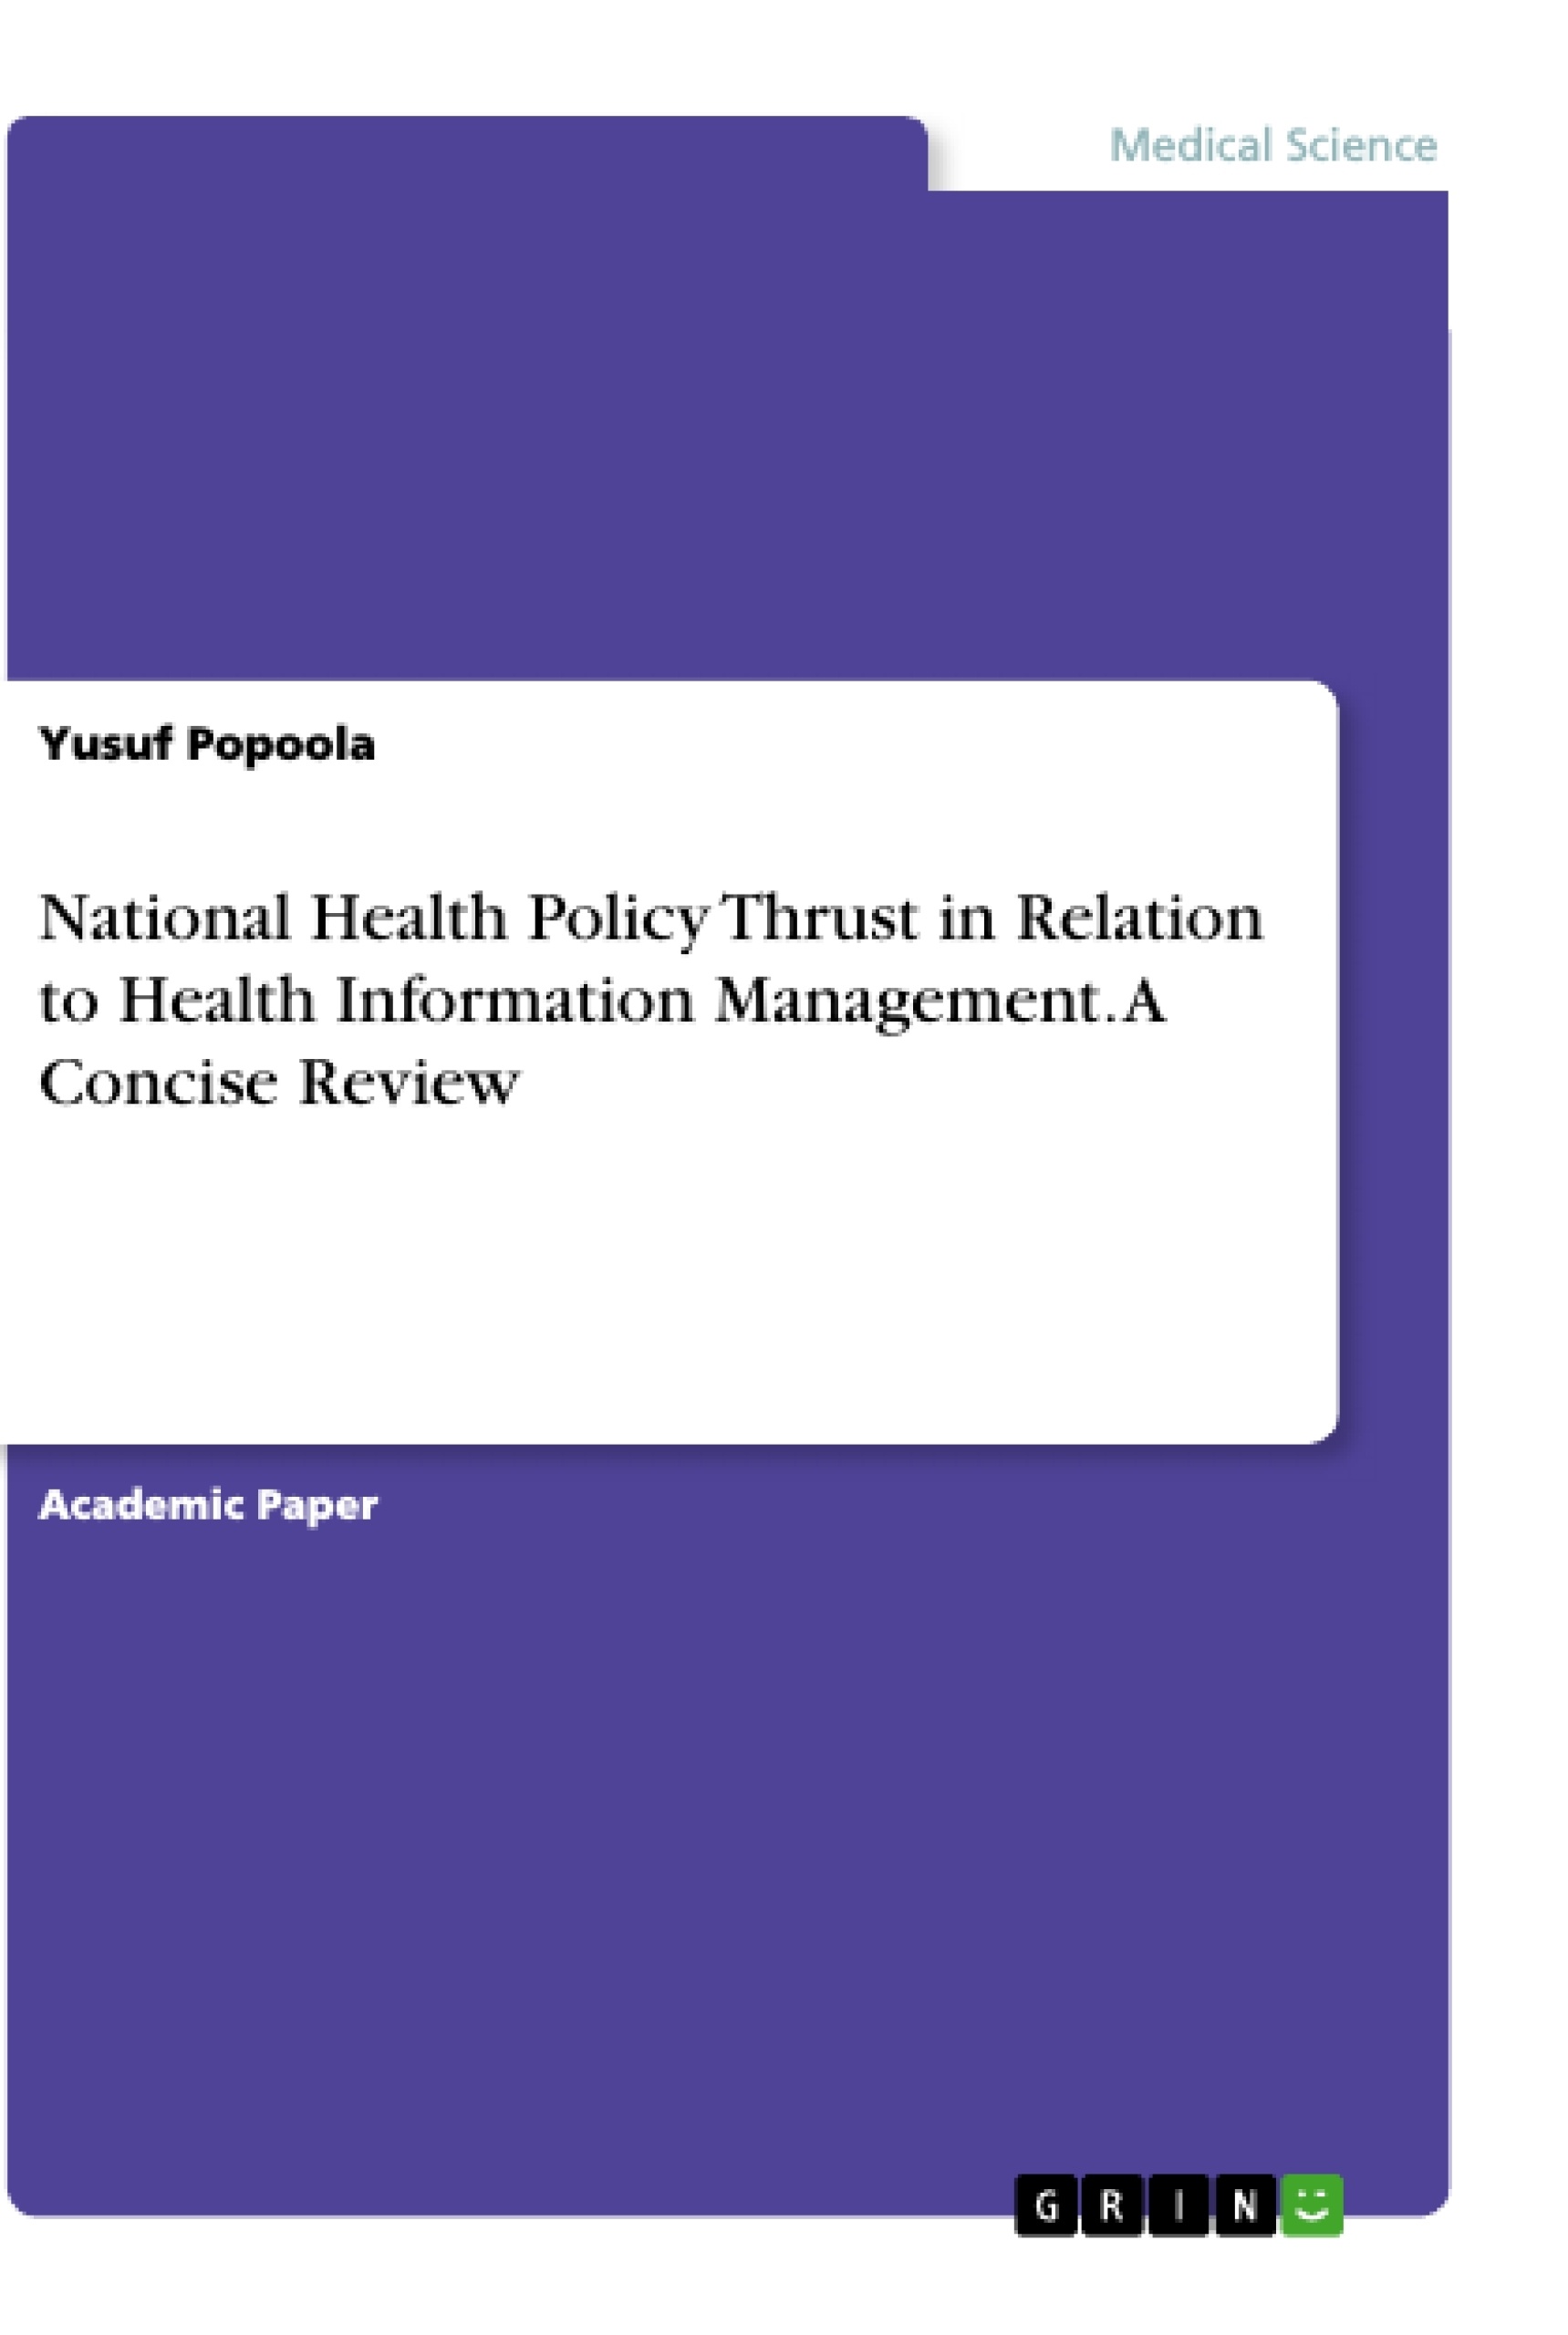 Título: National Health Policy Thrust in Relation to Health Information Management. A Concise Review